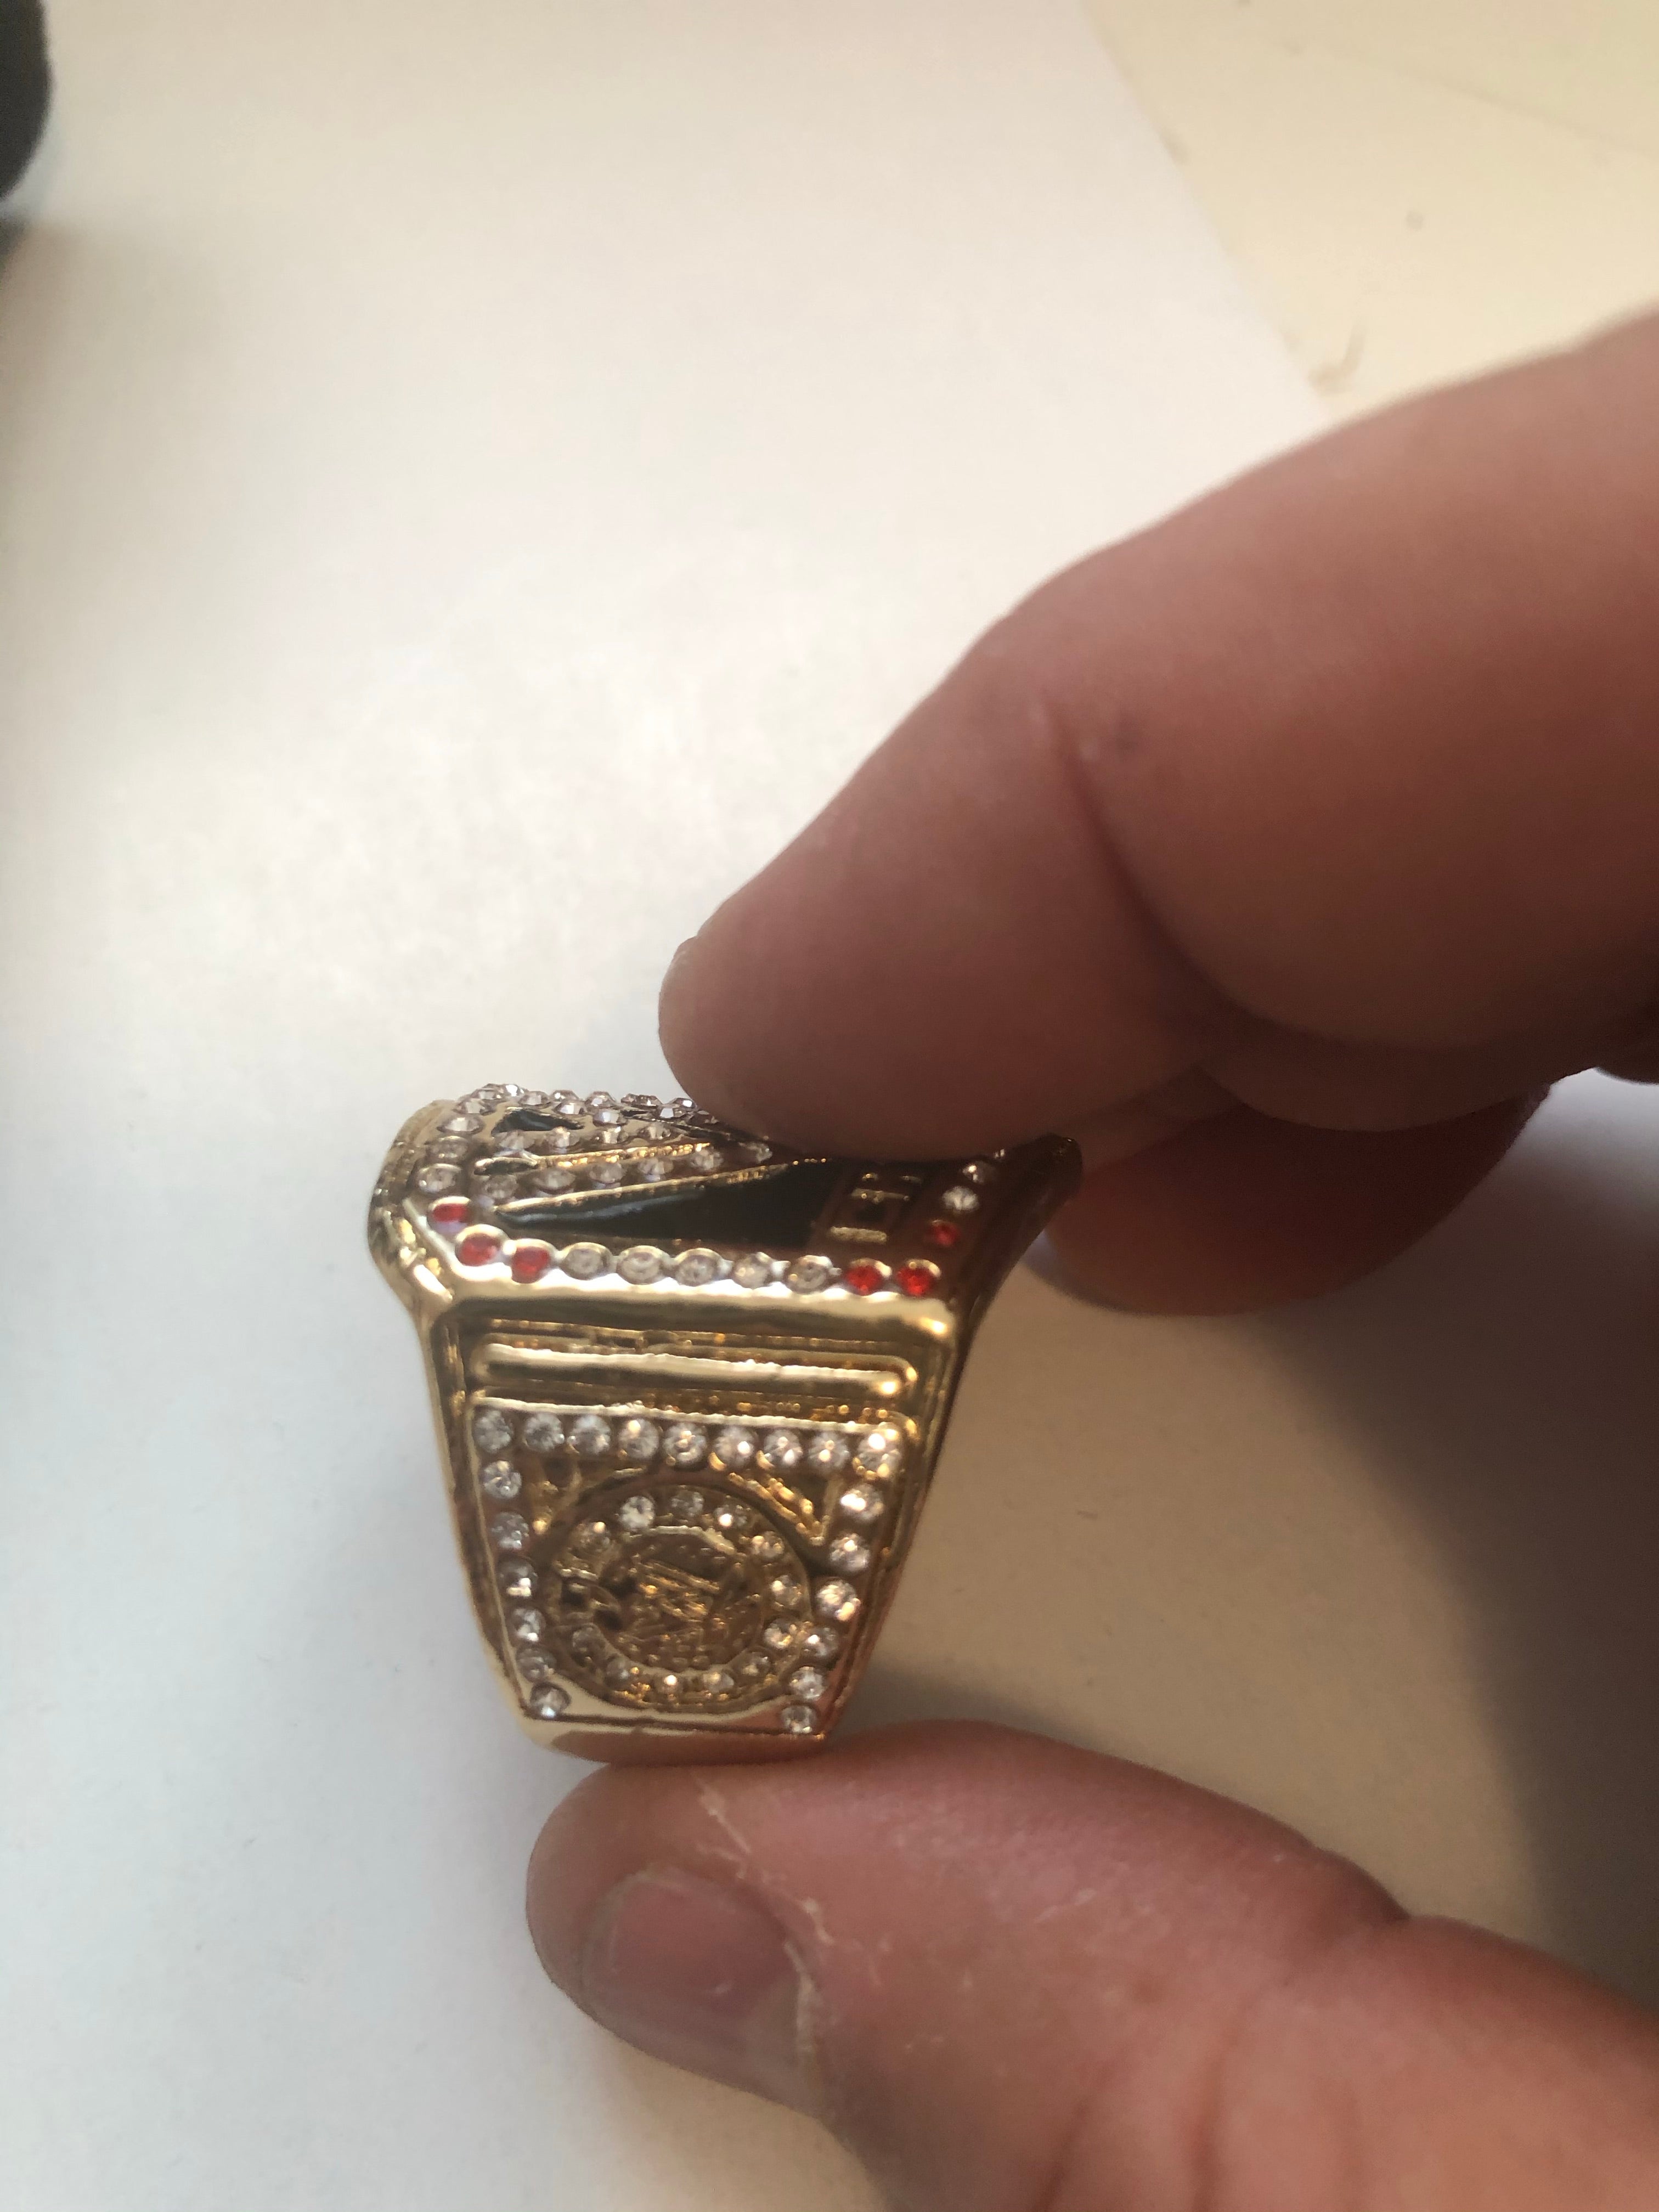 WWF wrestling replica ring with holder